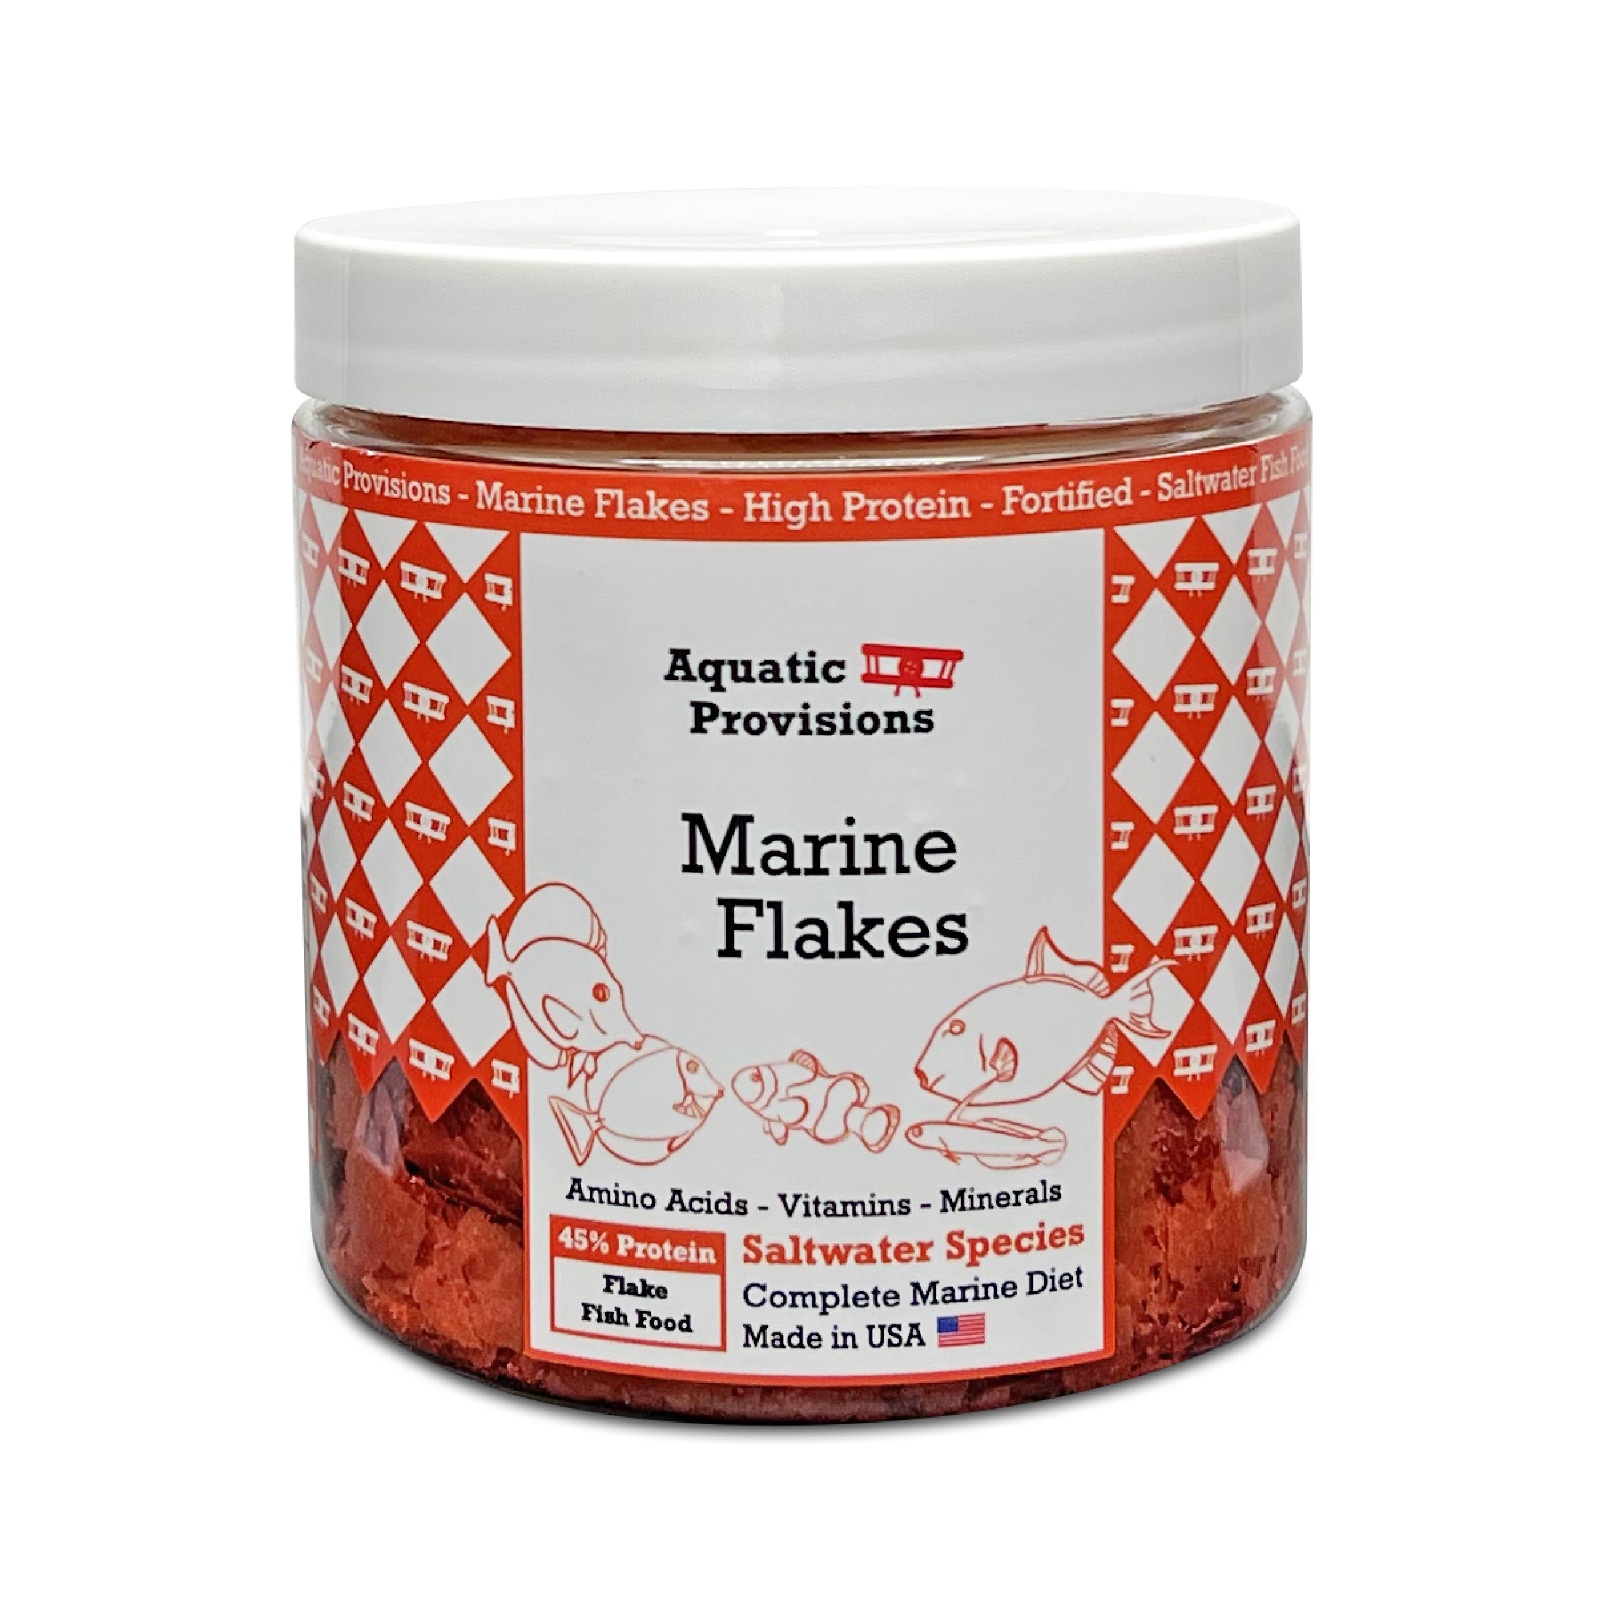 Marine Flakes Fish Food 1oz - 3.5oz for Saltwater Species 45% Protein USA Made